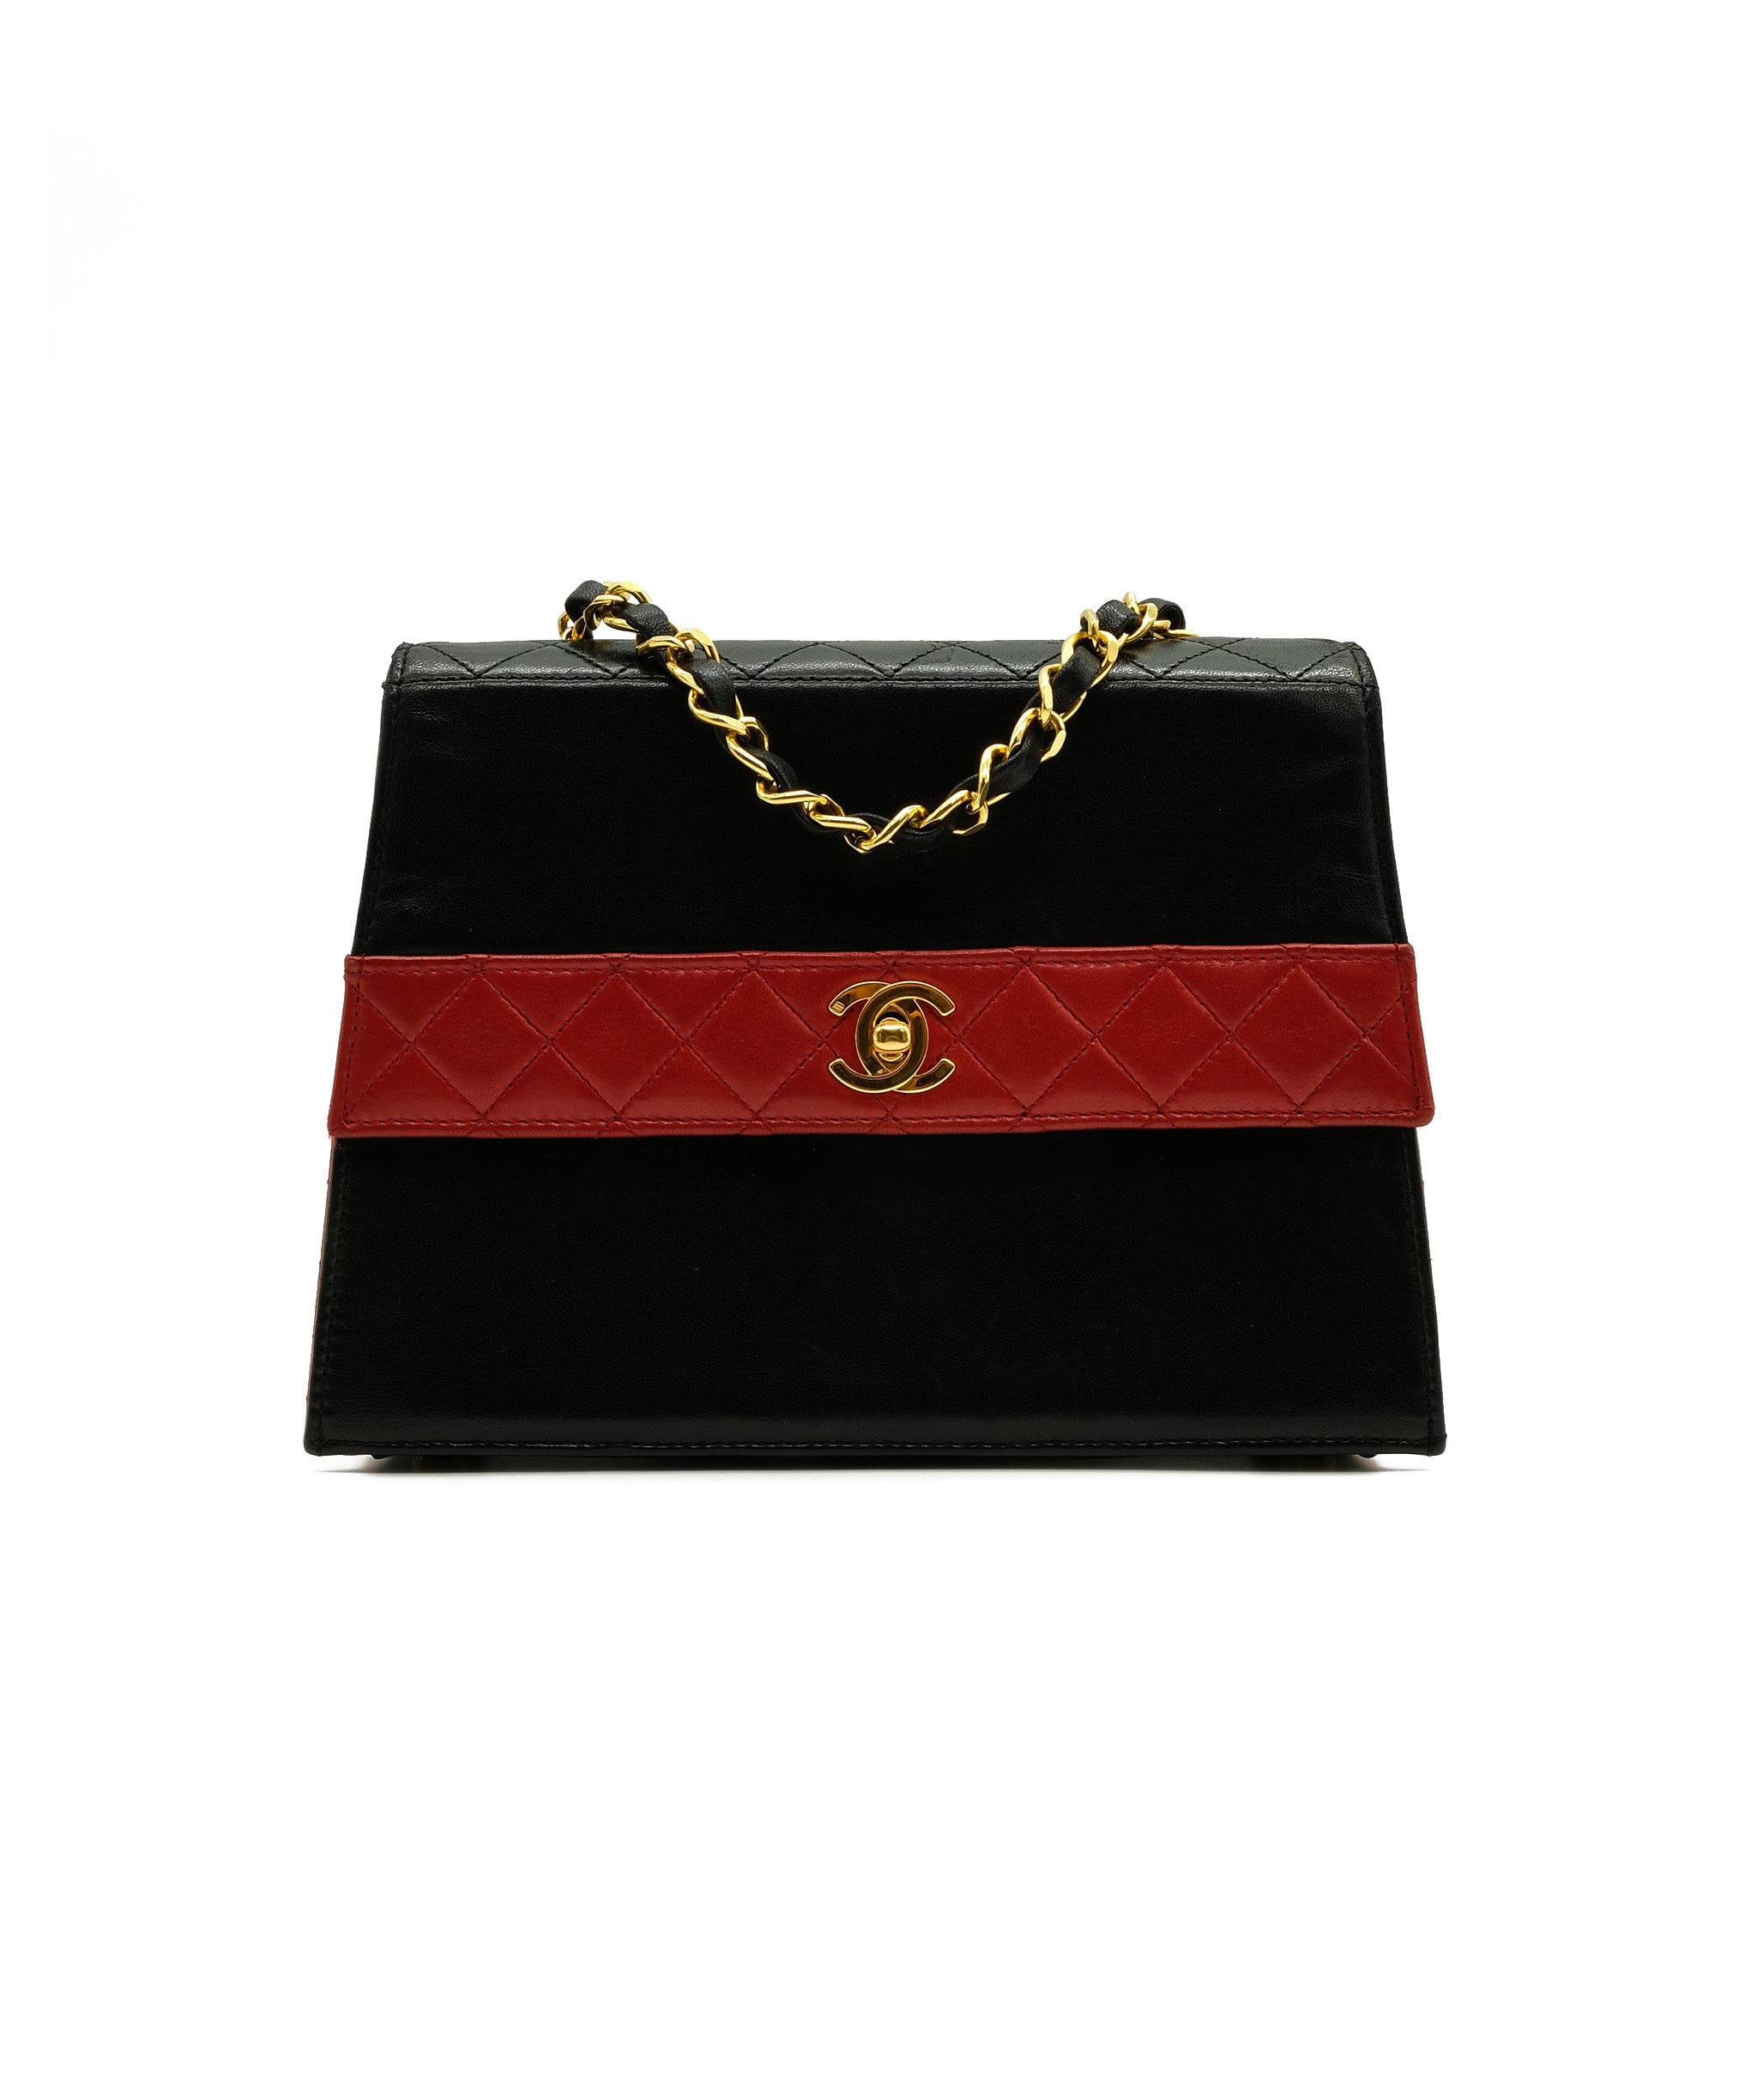 Chanel Chanel Vintage Black and Red Bi-colour Trapezoid Shoulder Bag with GHW - AWC1277